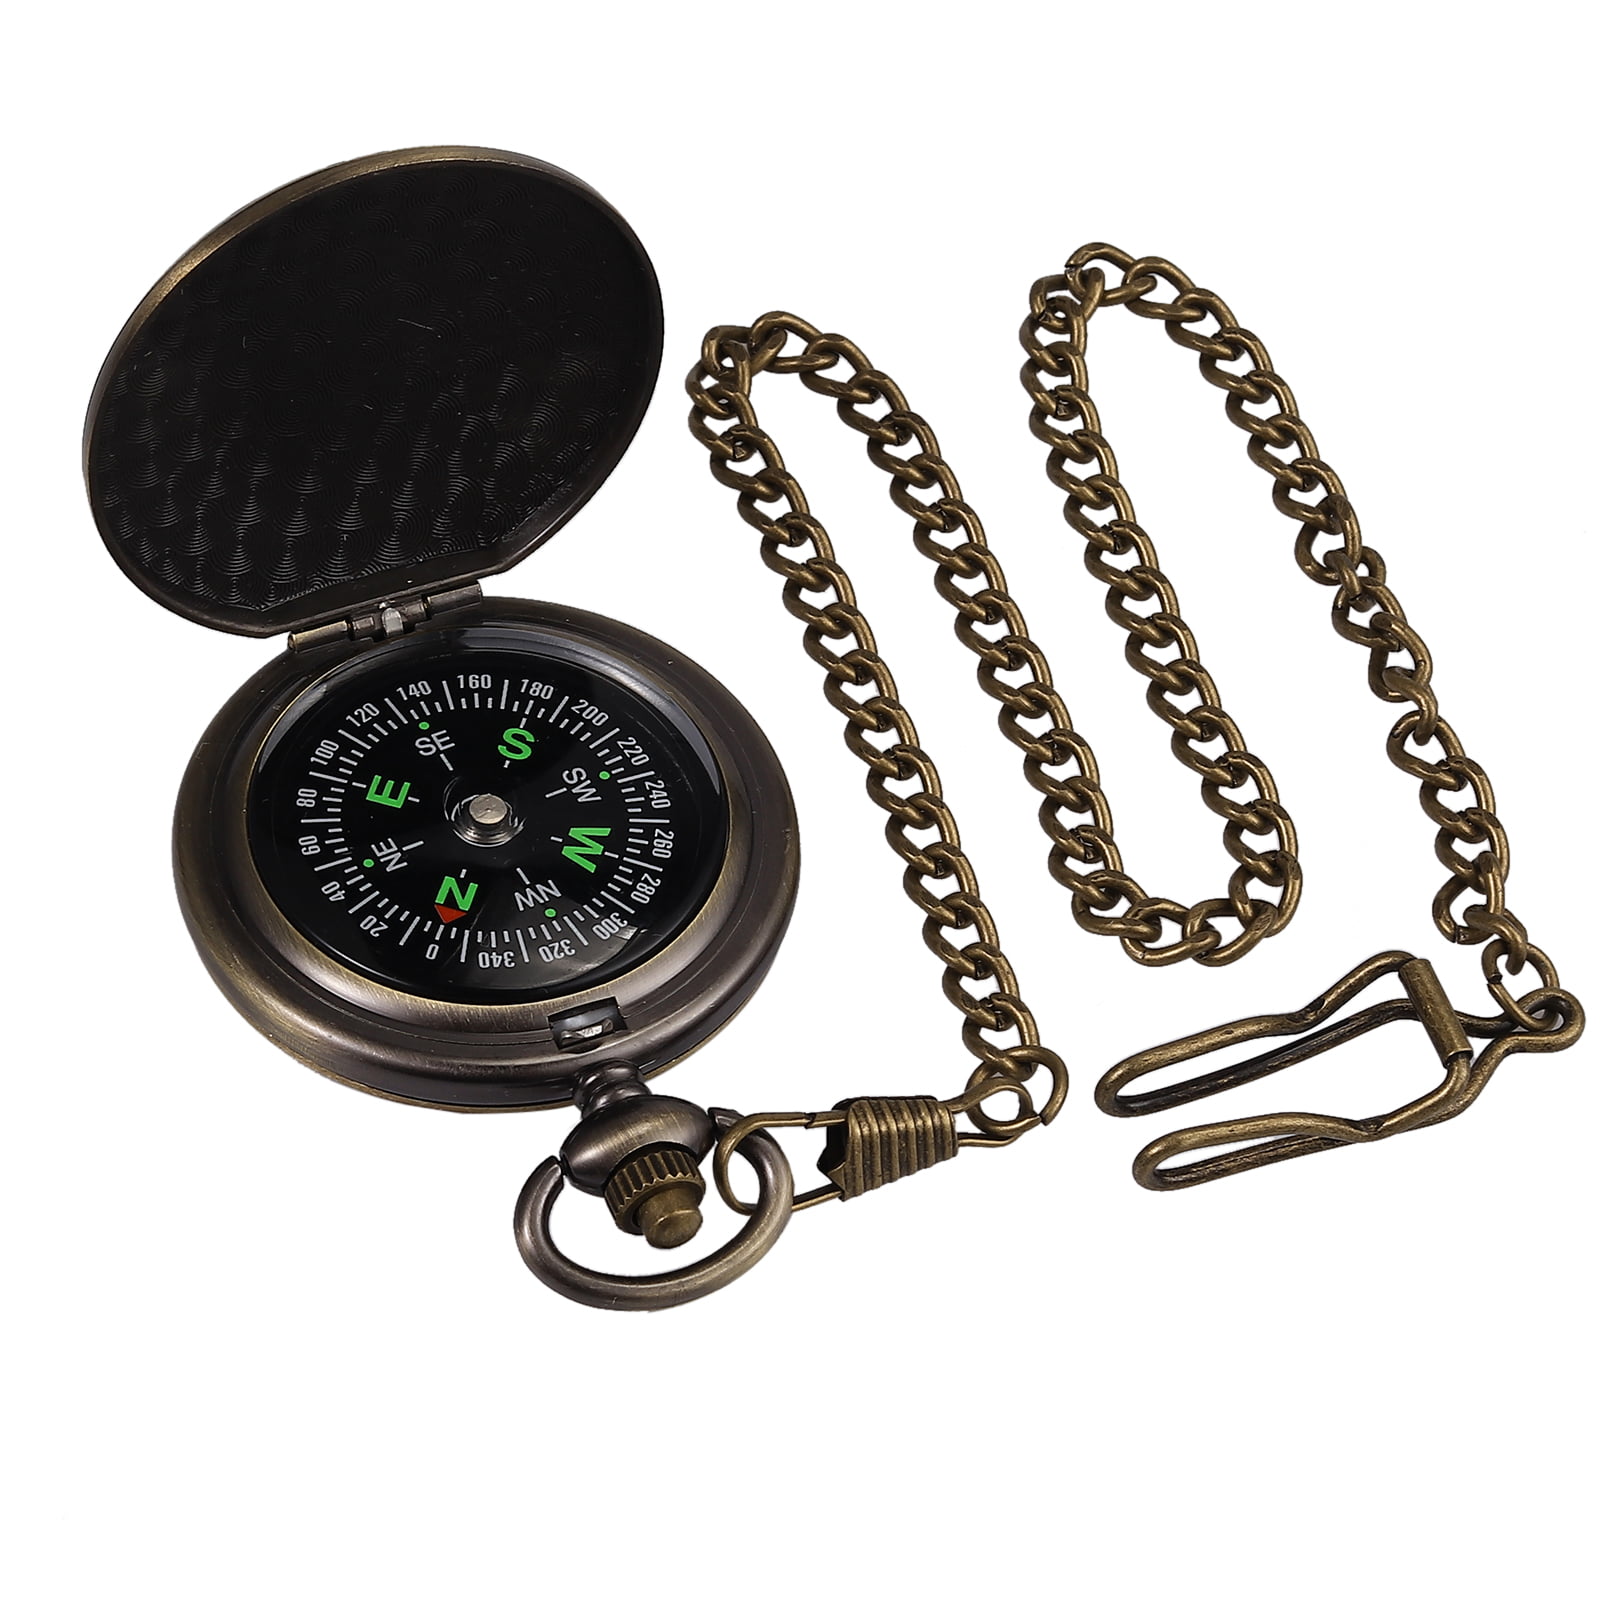 Sighting Metal High Accuracy Lensatic Compass With Scale Ruler and Bubble Level for sale online 